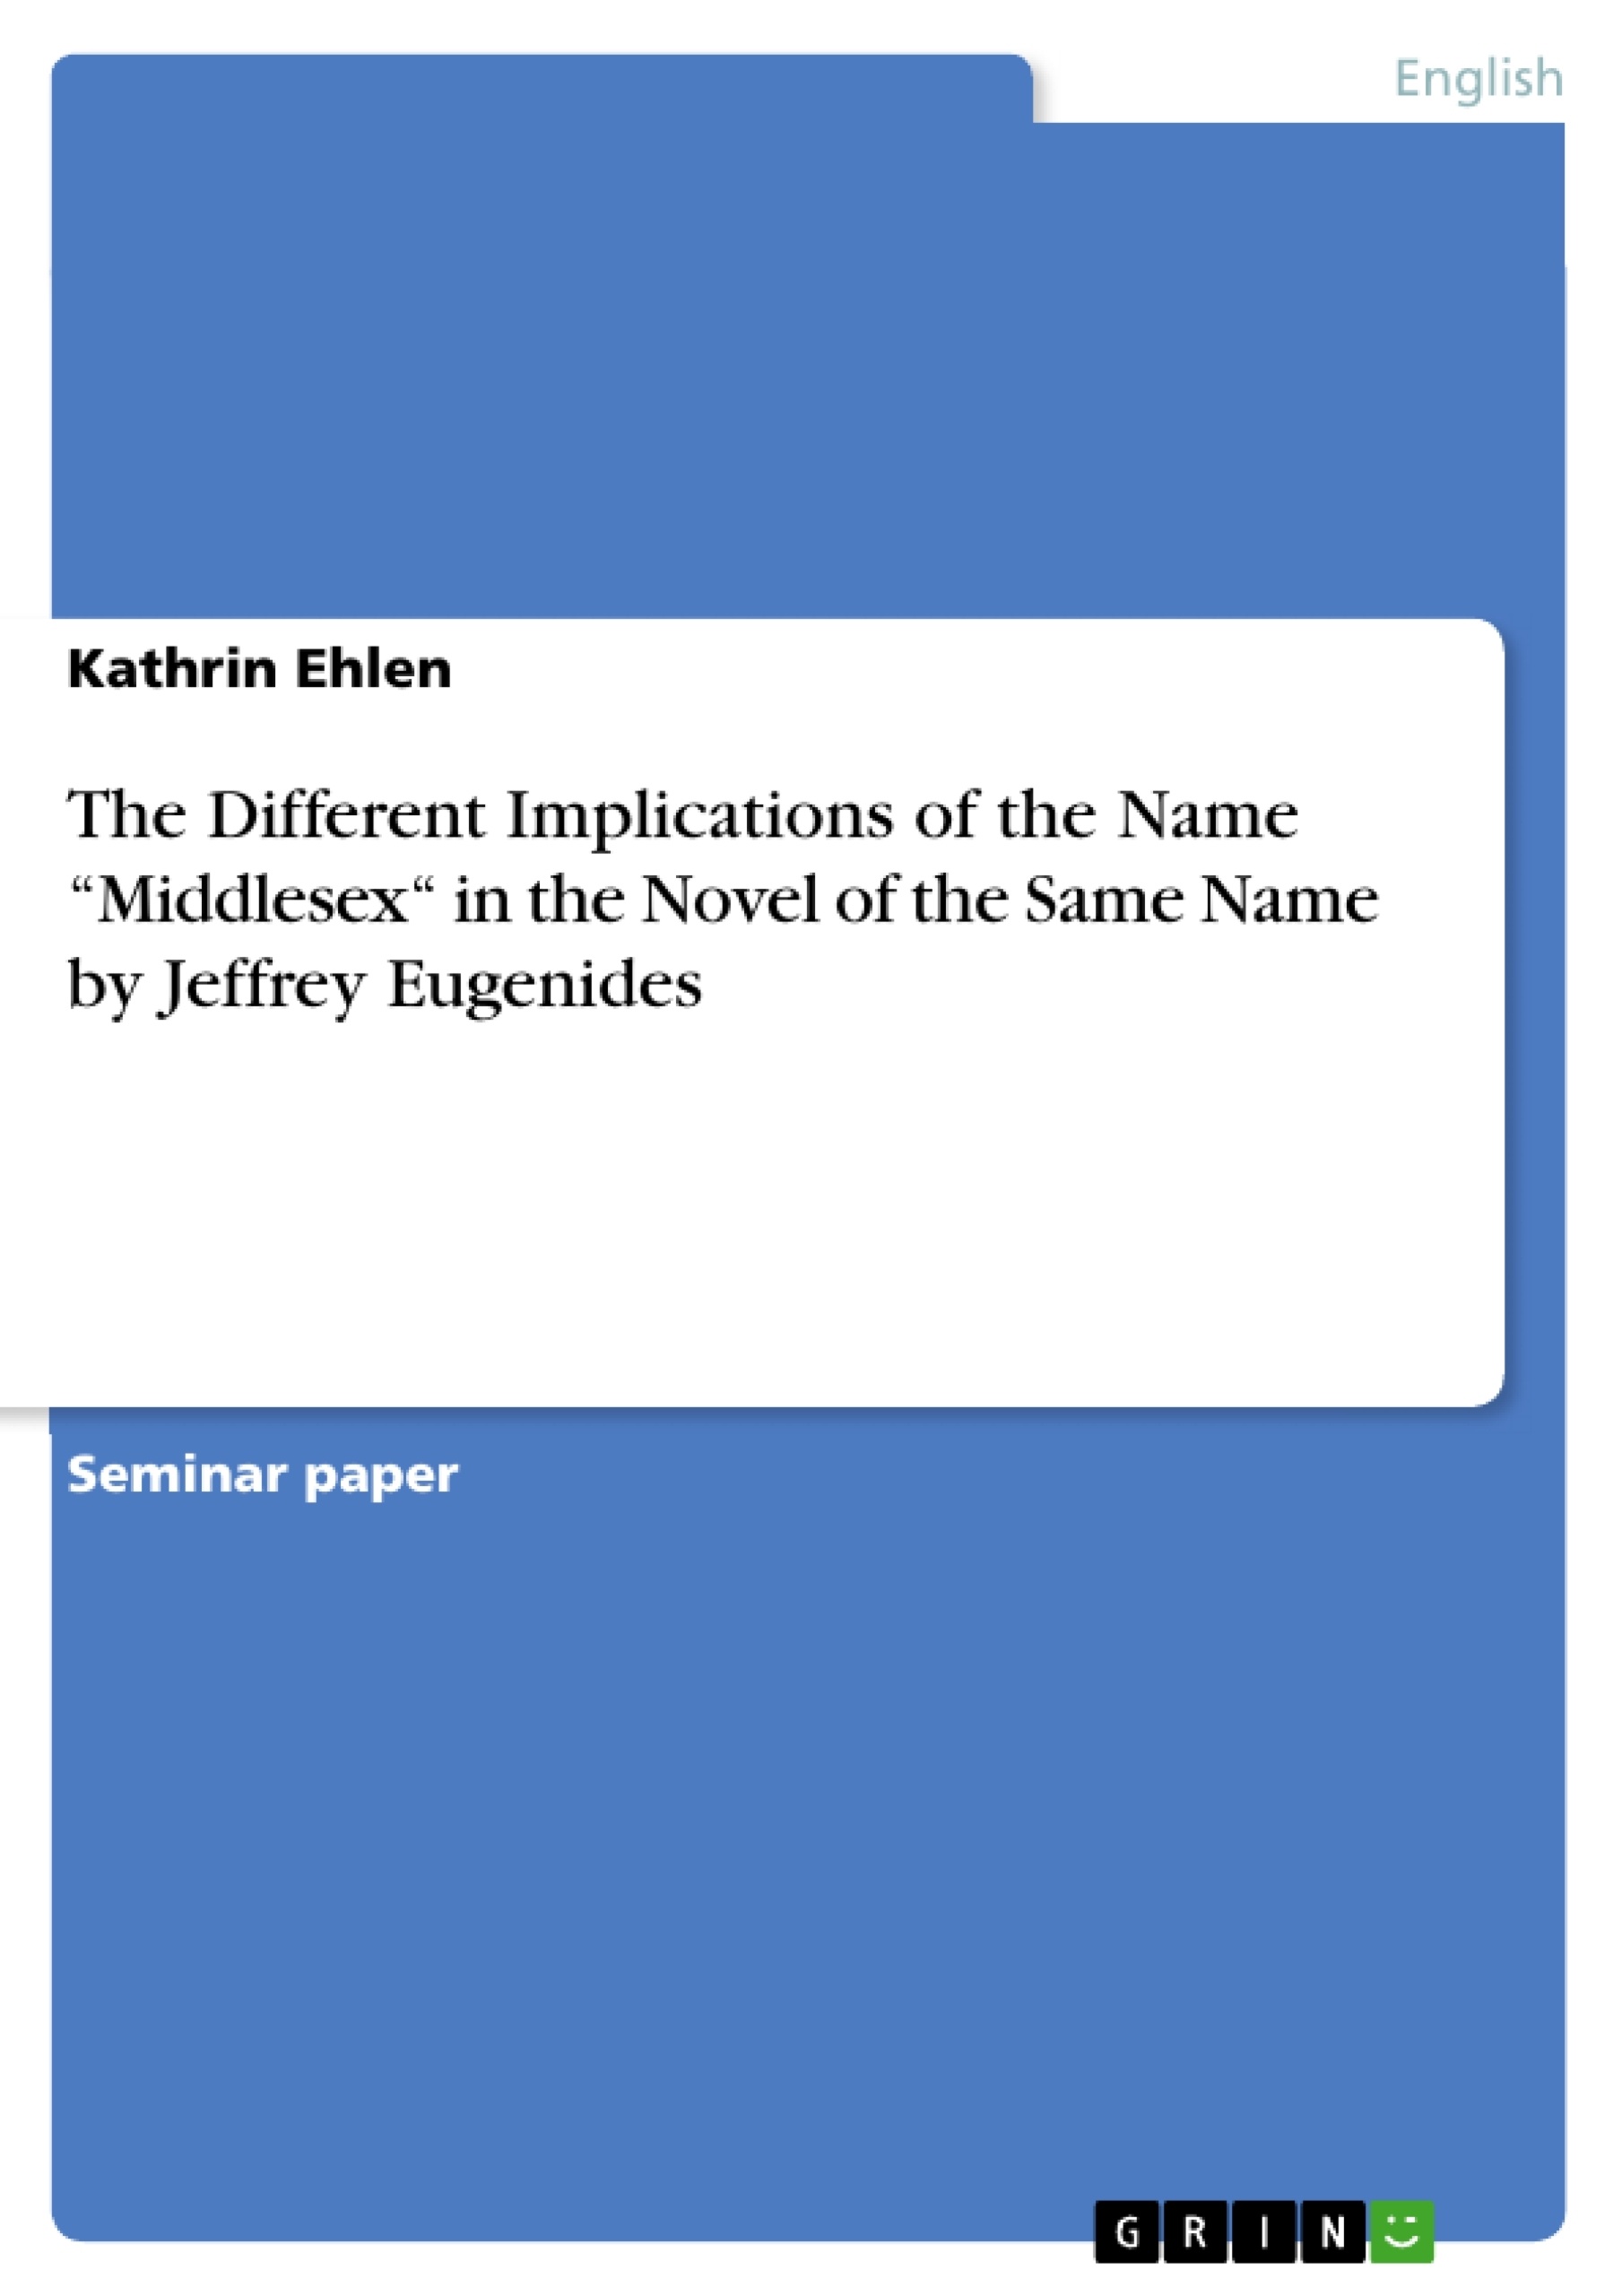 Título: The Different Implications of the Name “Middlesex“ in the Novel of the Same Name by Jeffrey Eugenides 